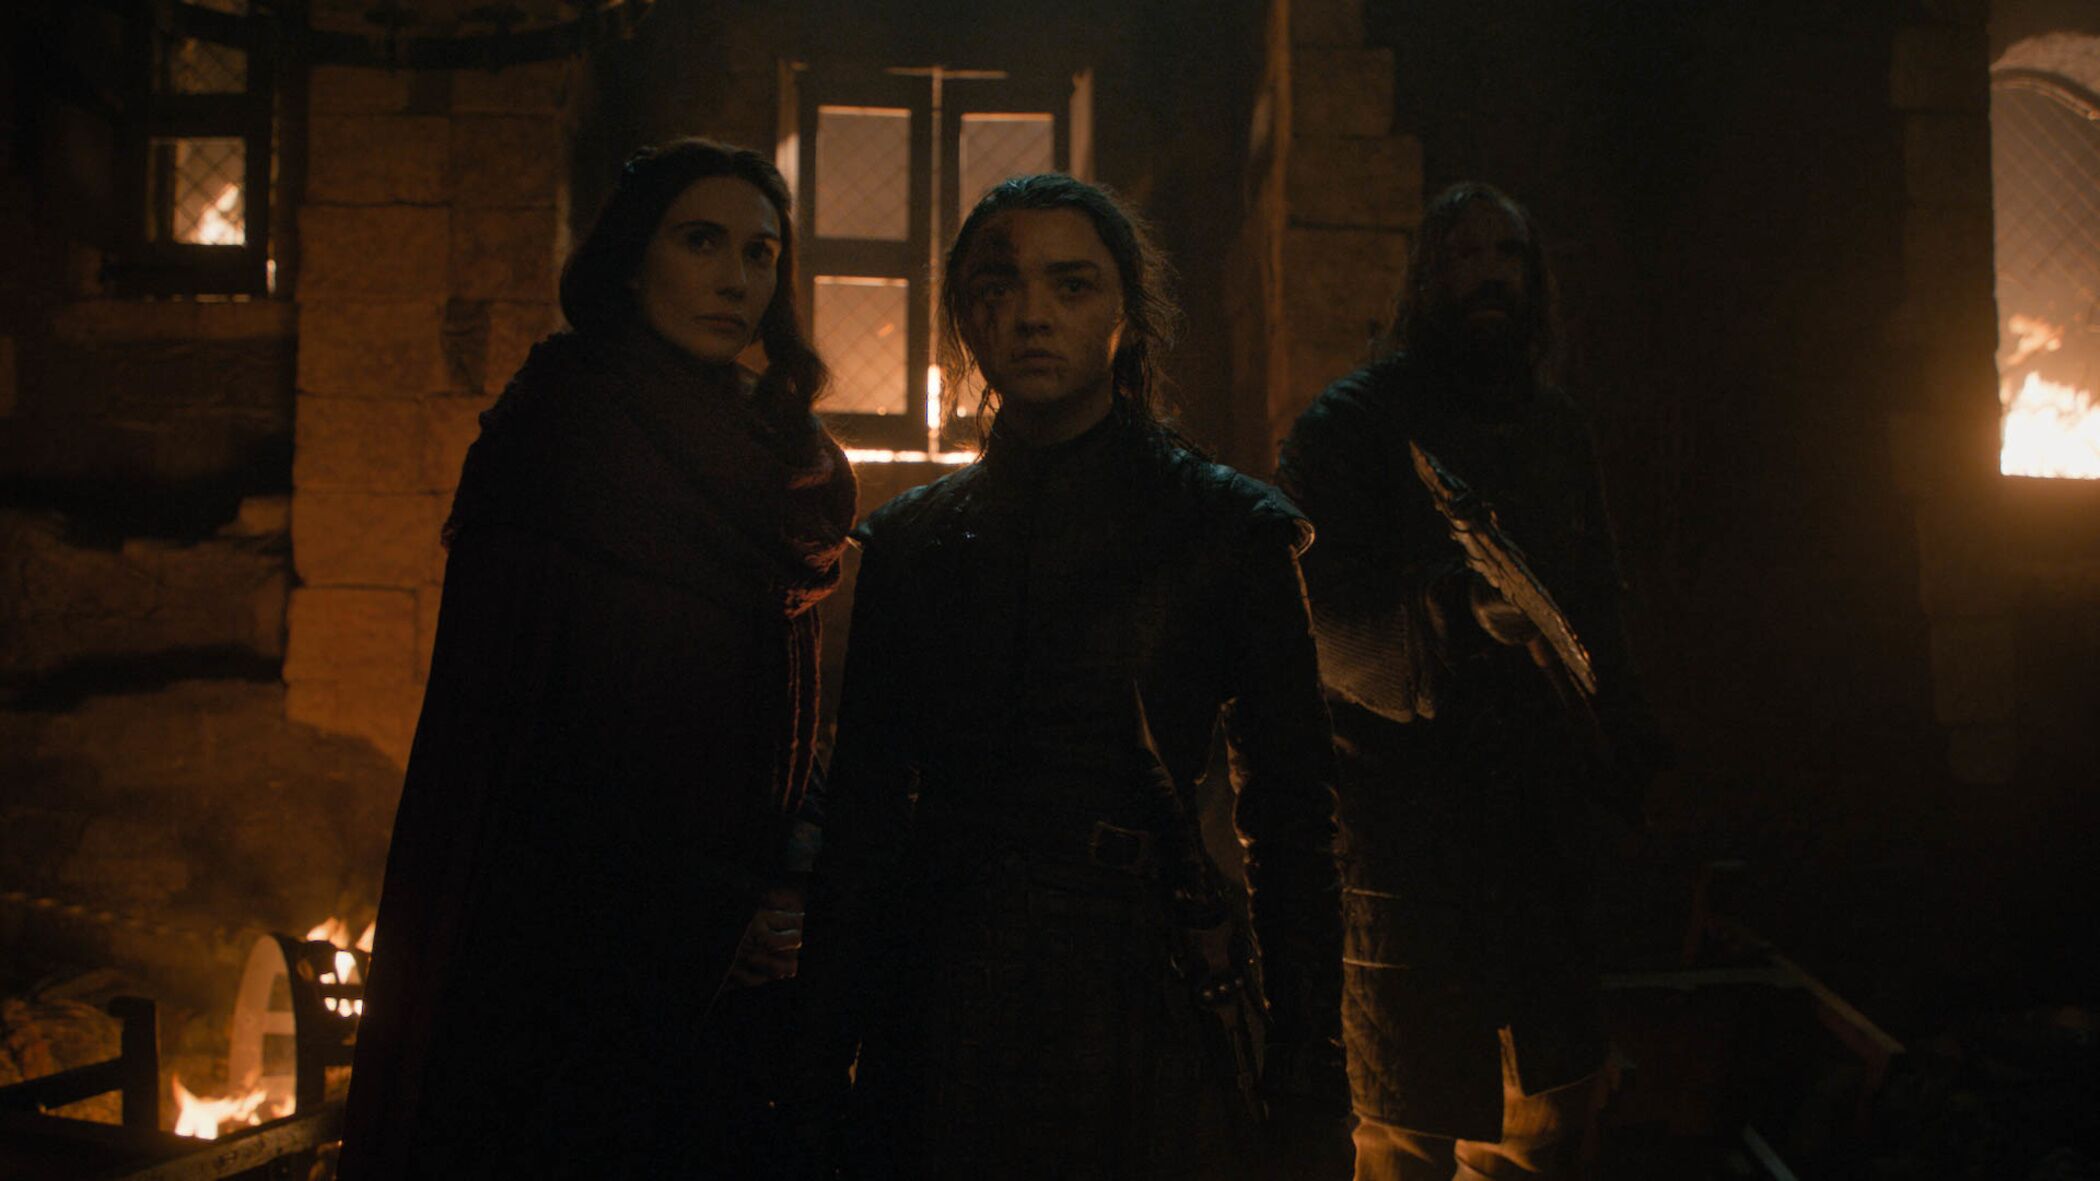 Melisandre (Carice van Houten), Arya (Maisie Williams), and the Hound (Rory McCann) hide in Winterfell during "The Long Night" on HBO's Game of Thrones